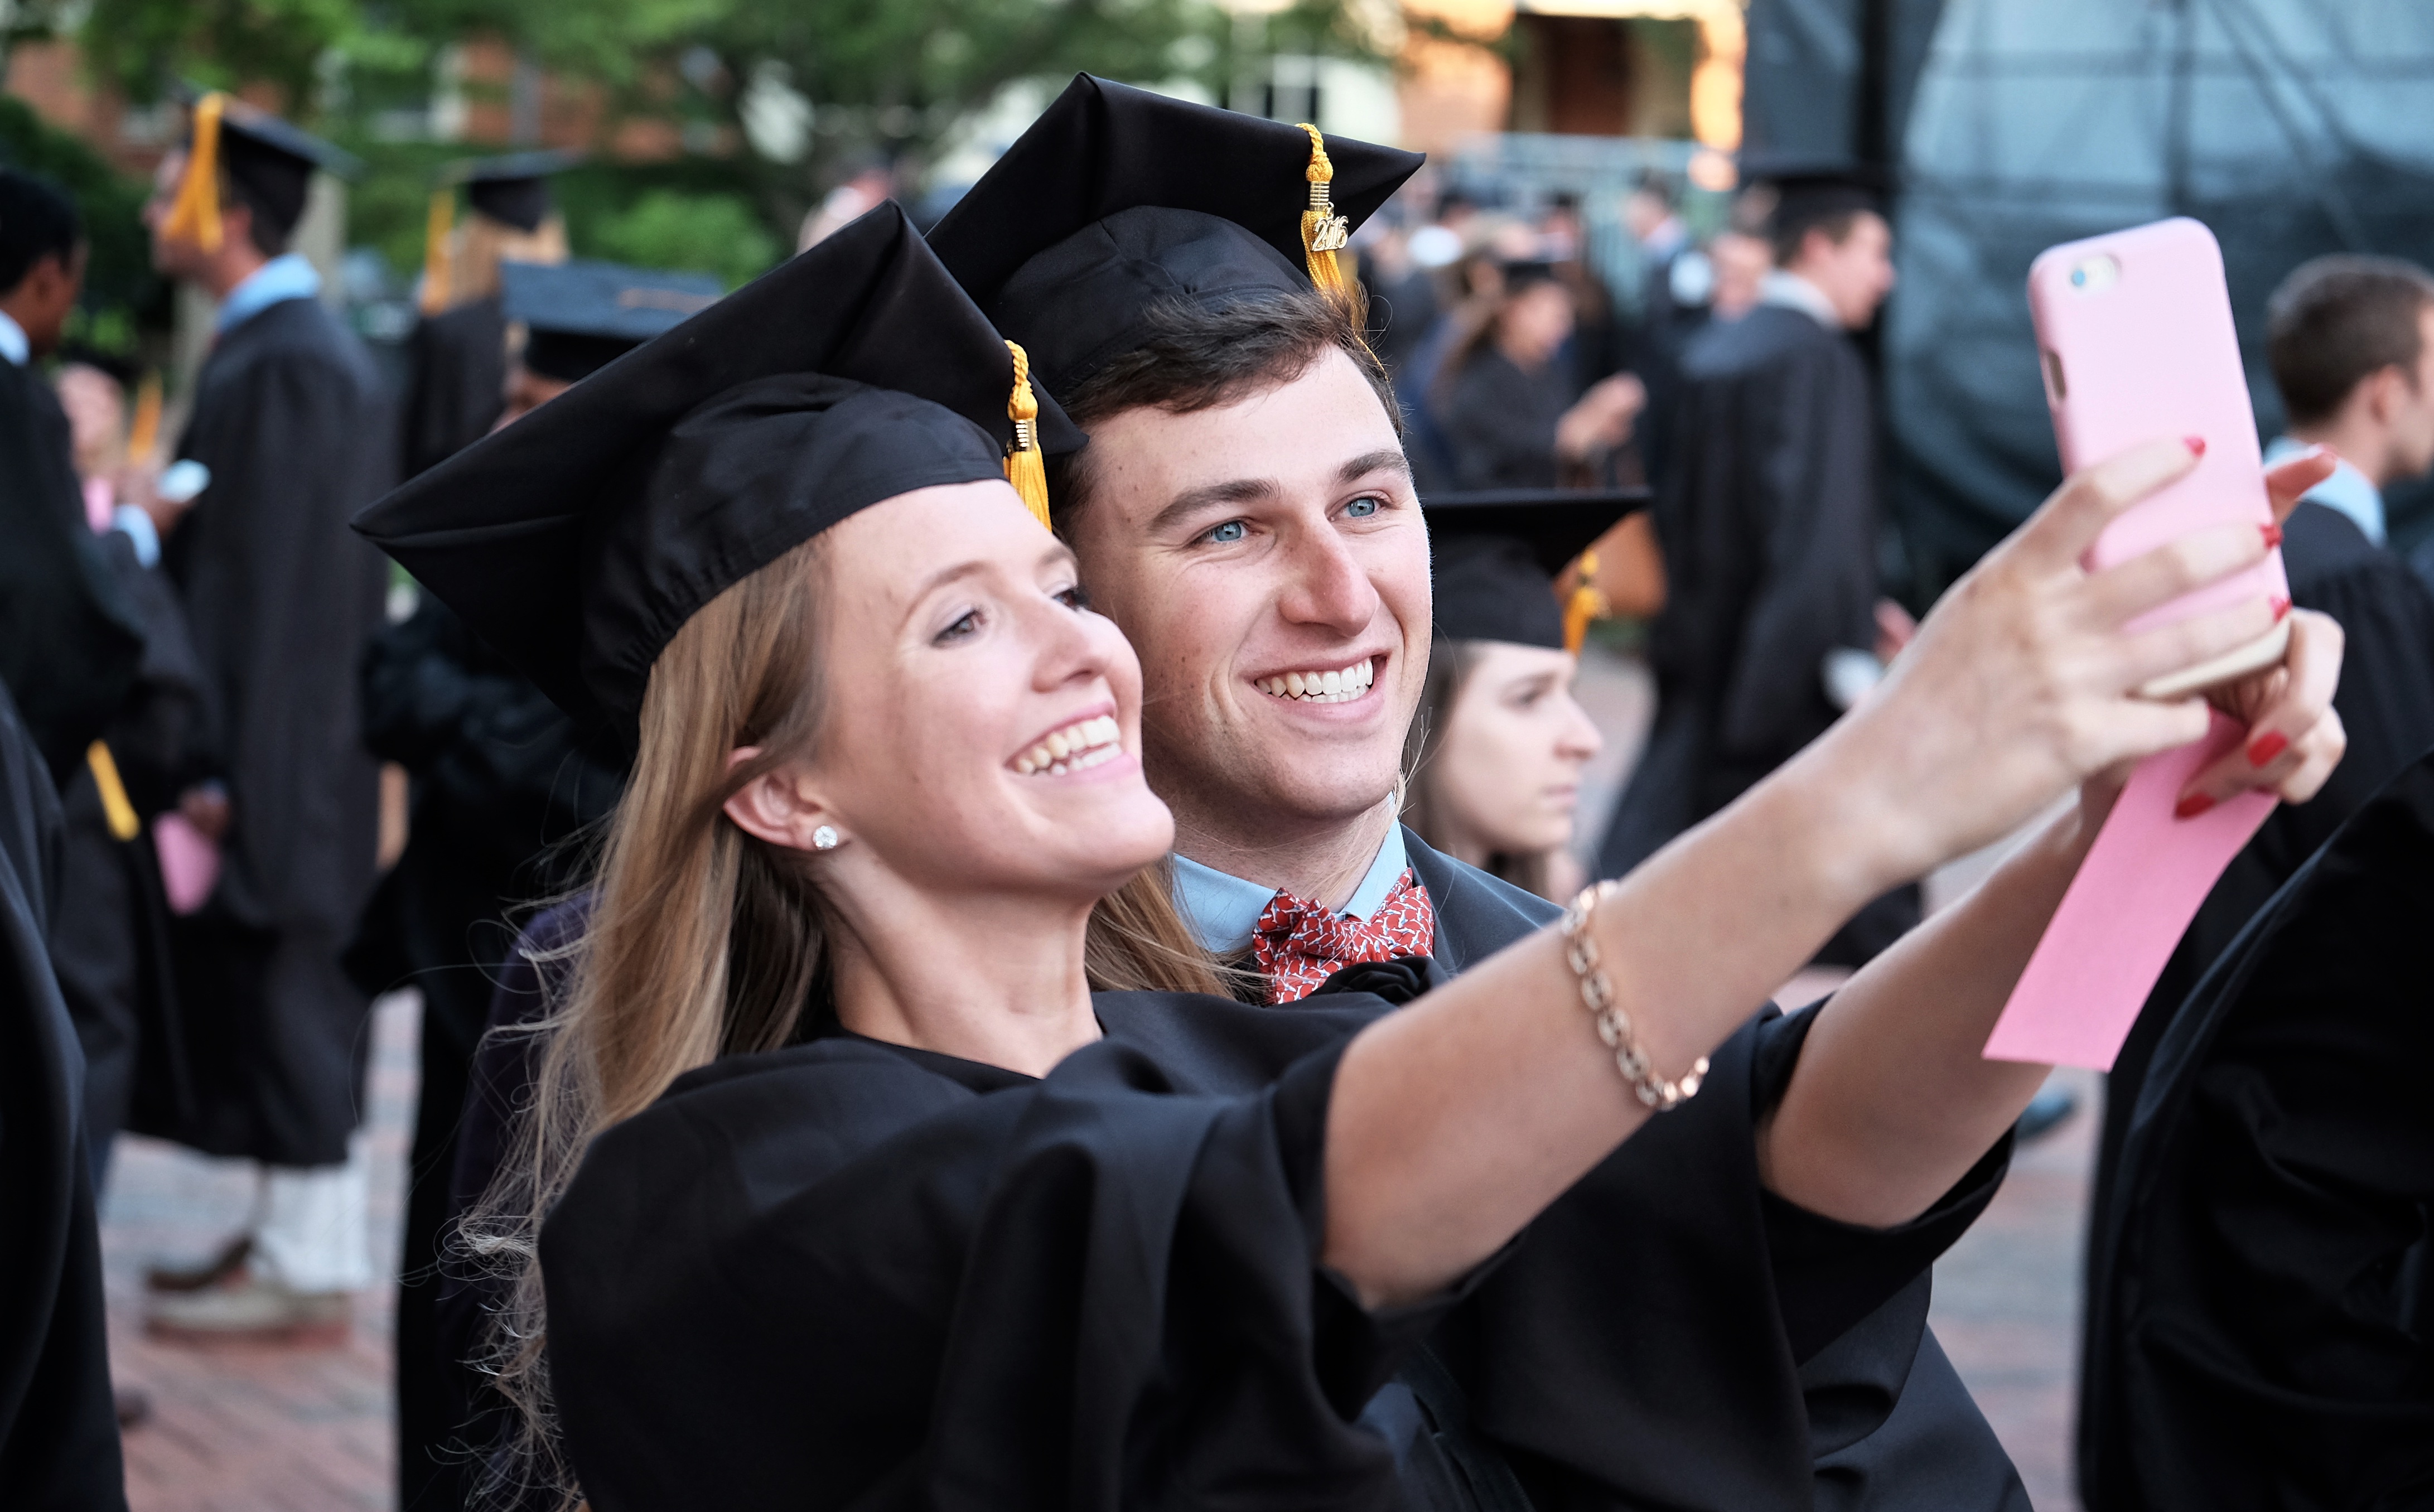 WFU School of Business held their Hooding ceremony in Wait Chapel